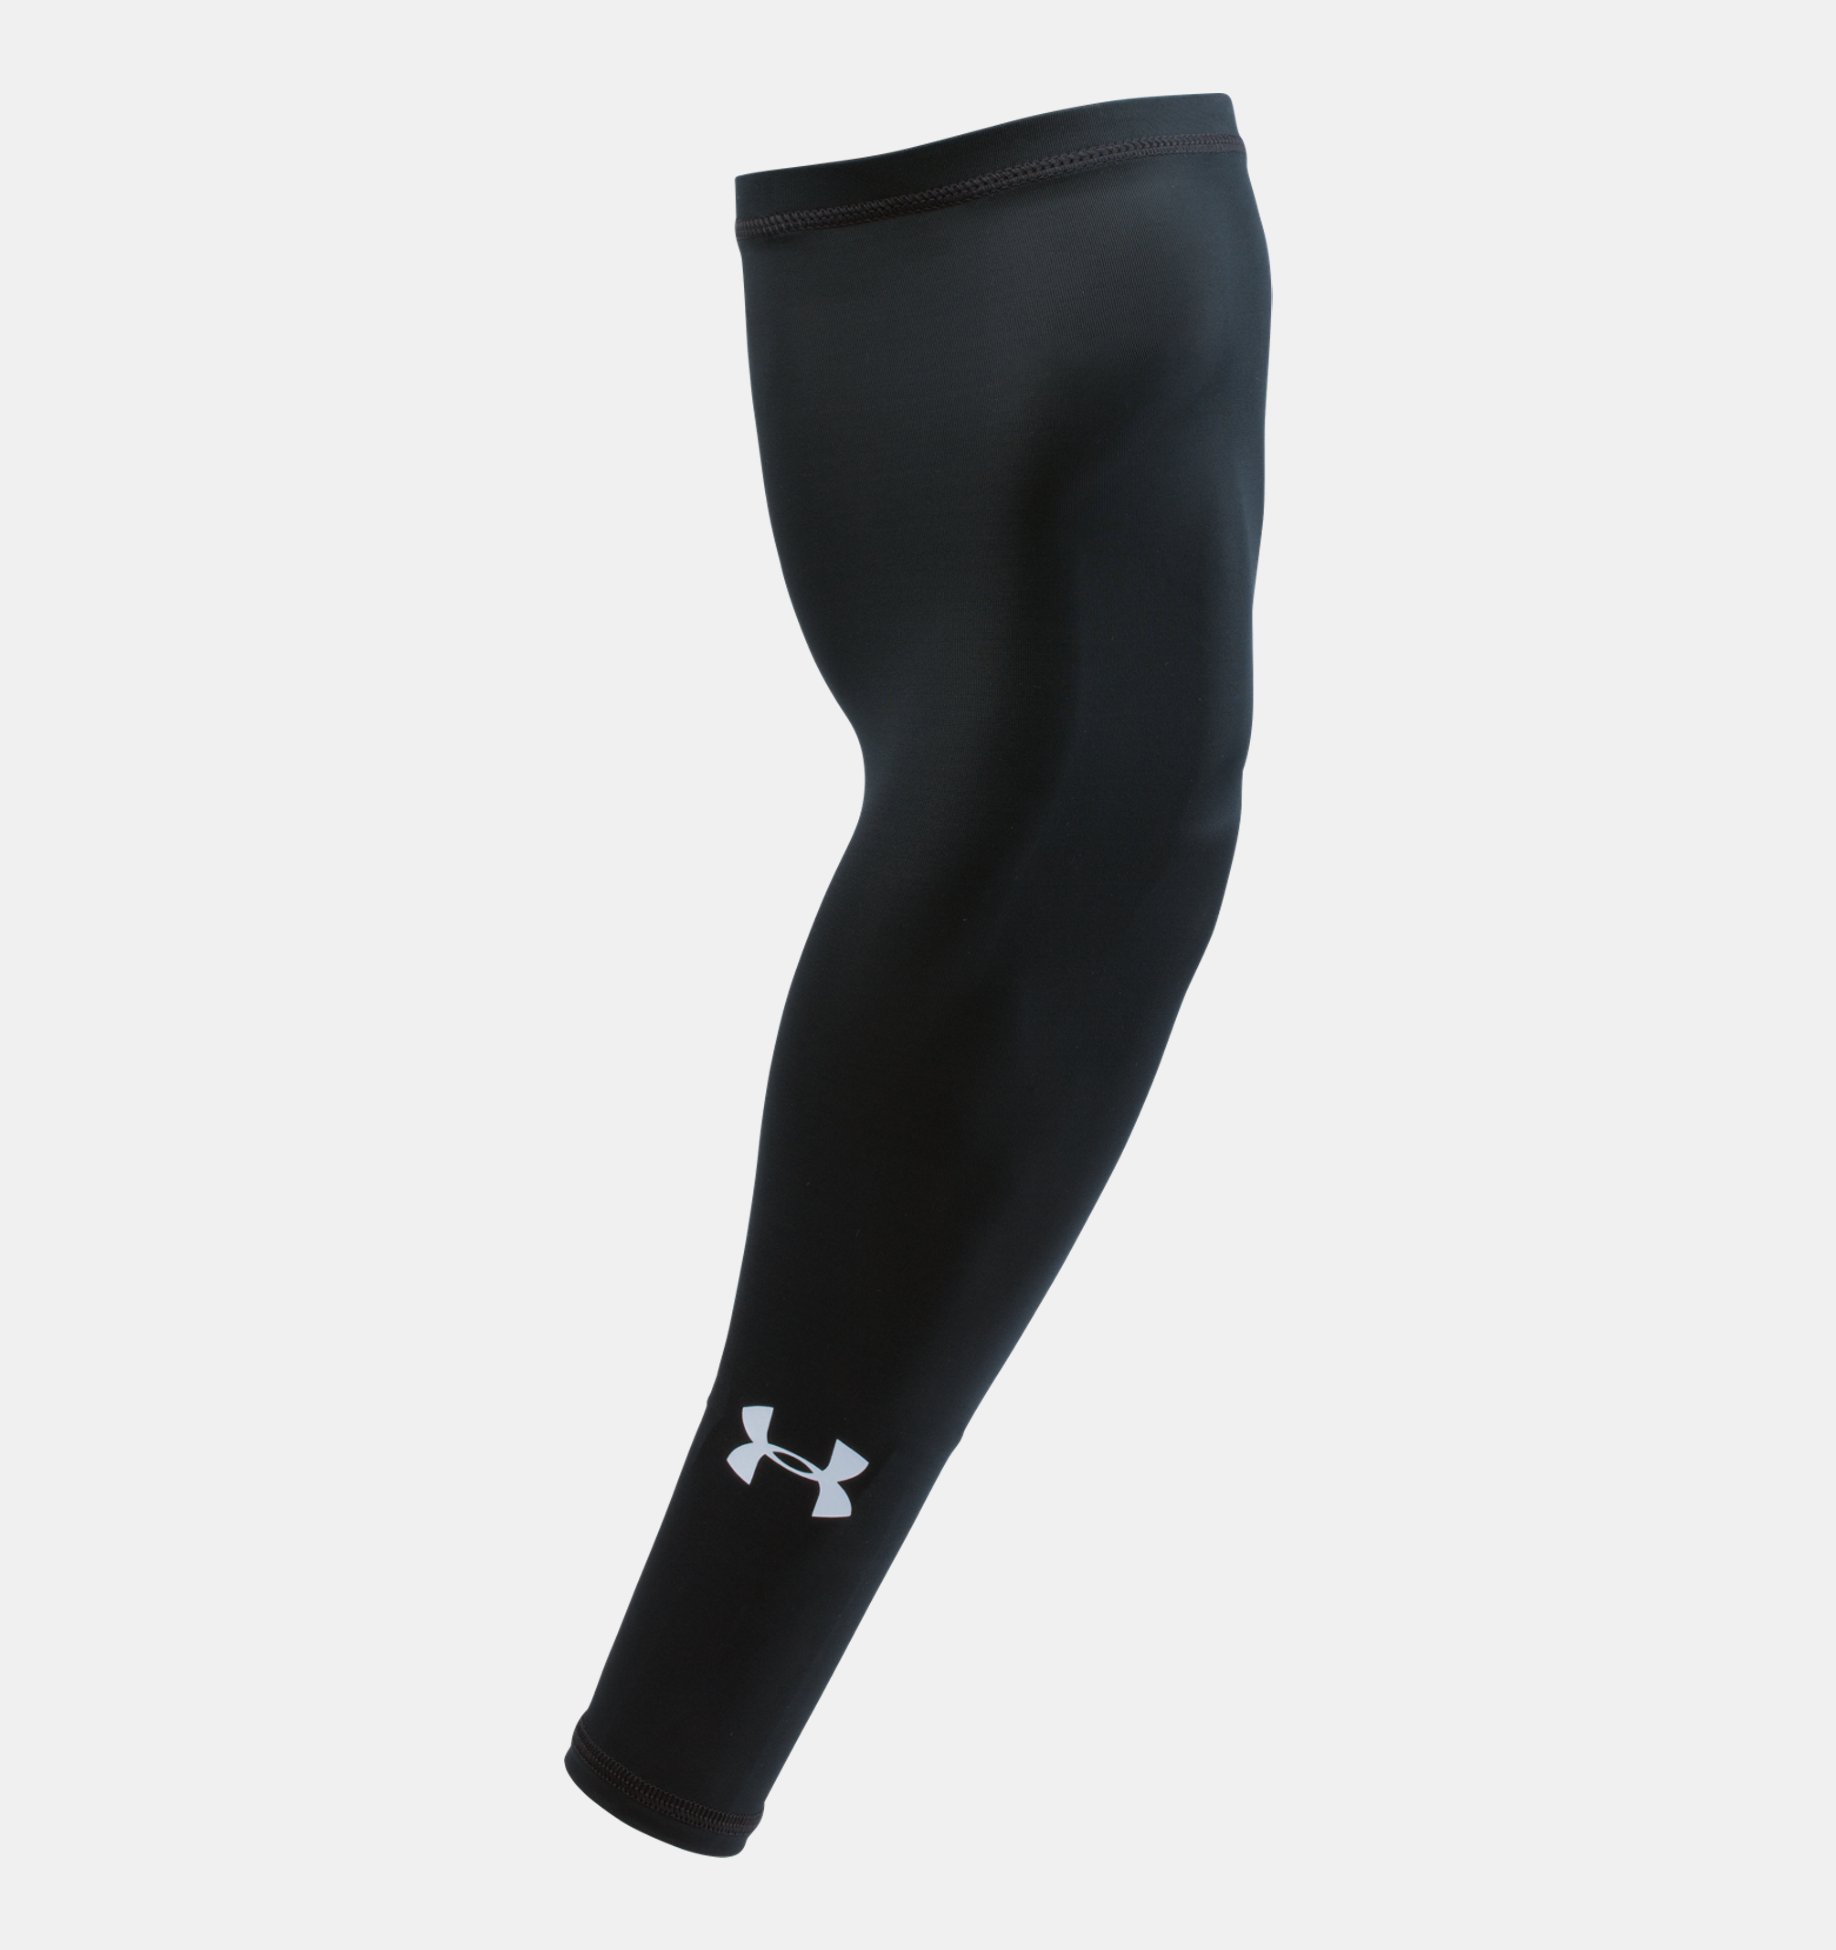 Youth Adult S/M Under Armour UA Shooter Compression Arm Sleeve L/XL Sports 